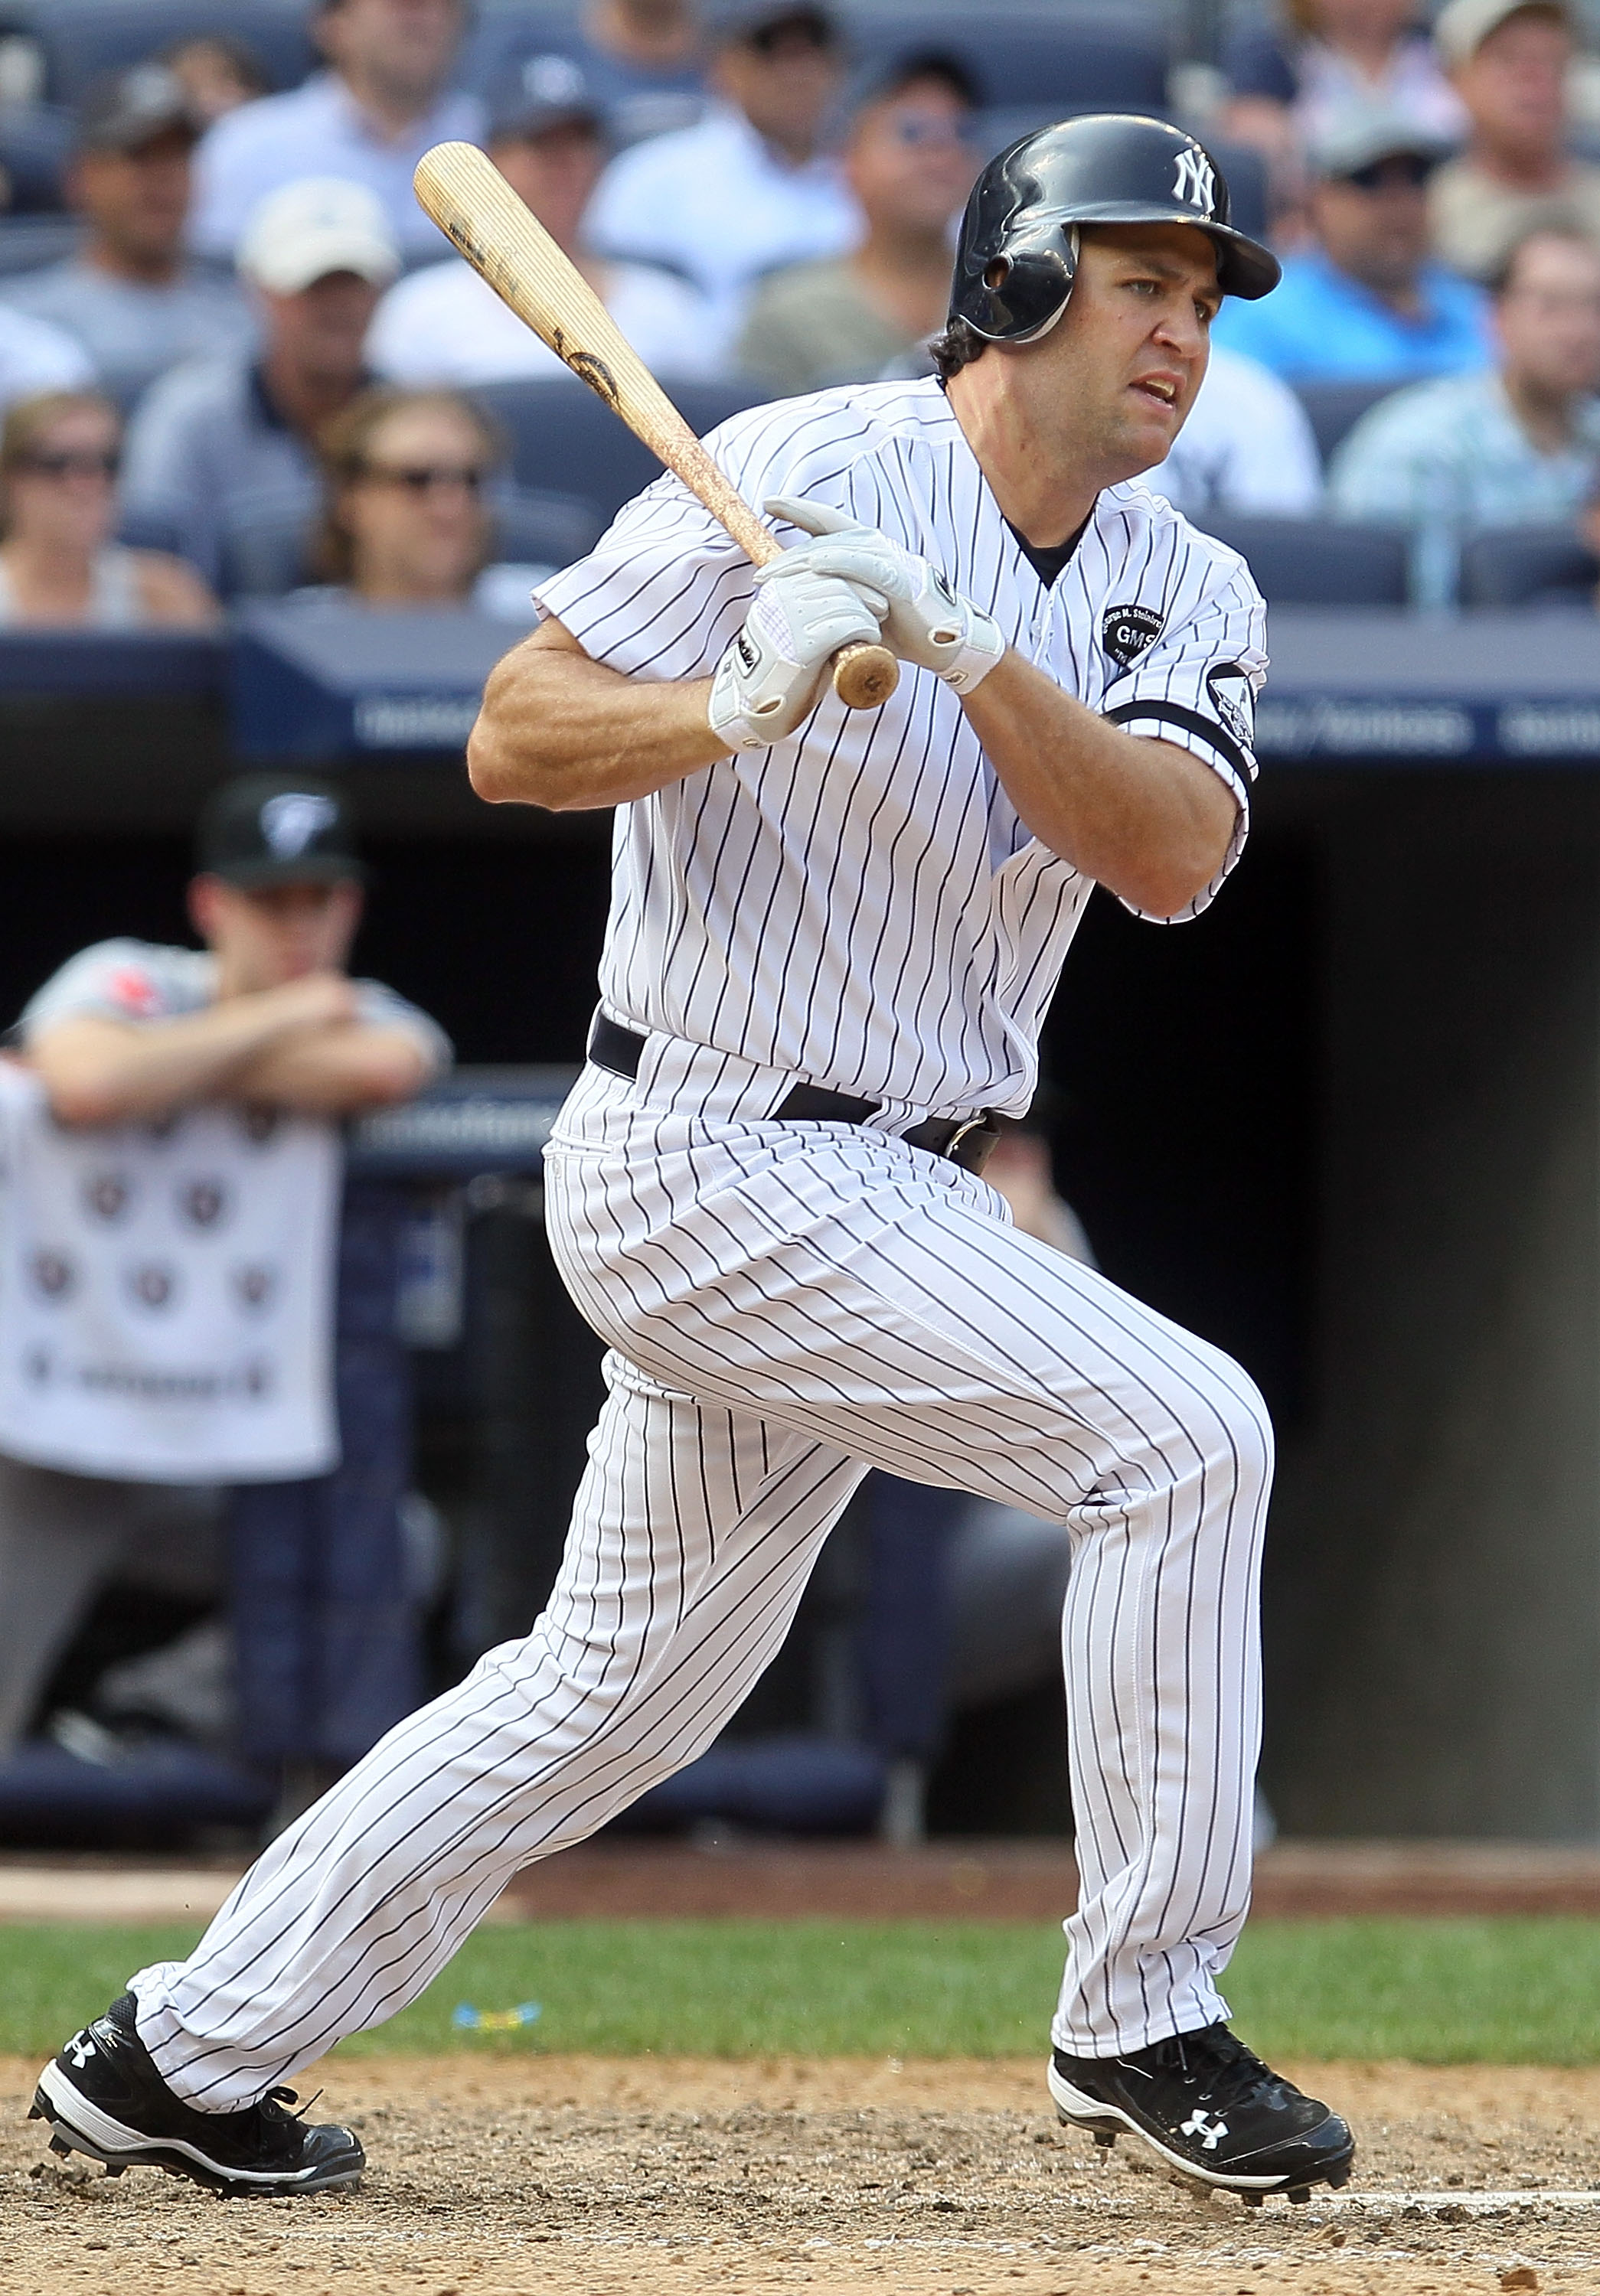 NEW YORK - AUGUST 04:  Lance Berkman #17 of the New York Yankees bats against the Toronto Blue Jays on August 4, 2010 at Yankee Stadium in the Bronx borough of New York City.  (Photo by Jim McIsaac/Getty Images)